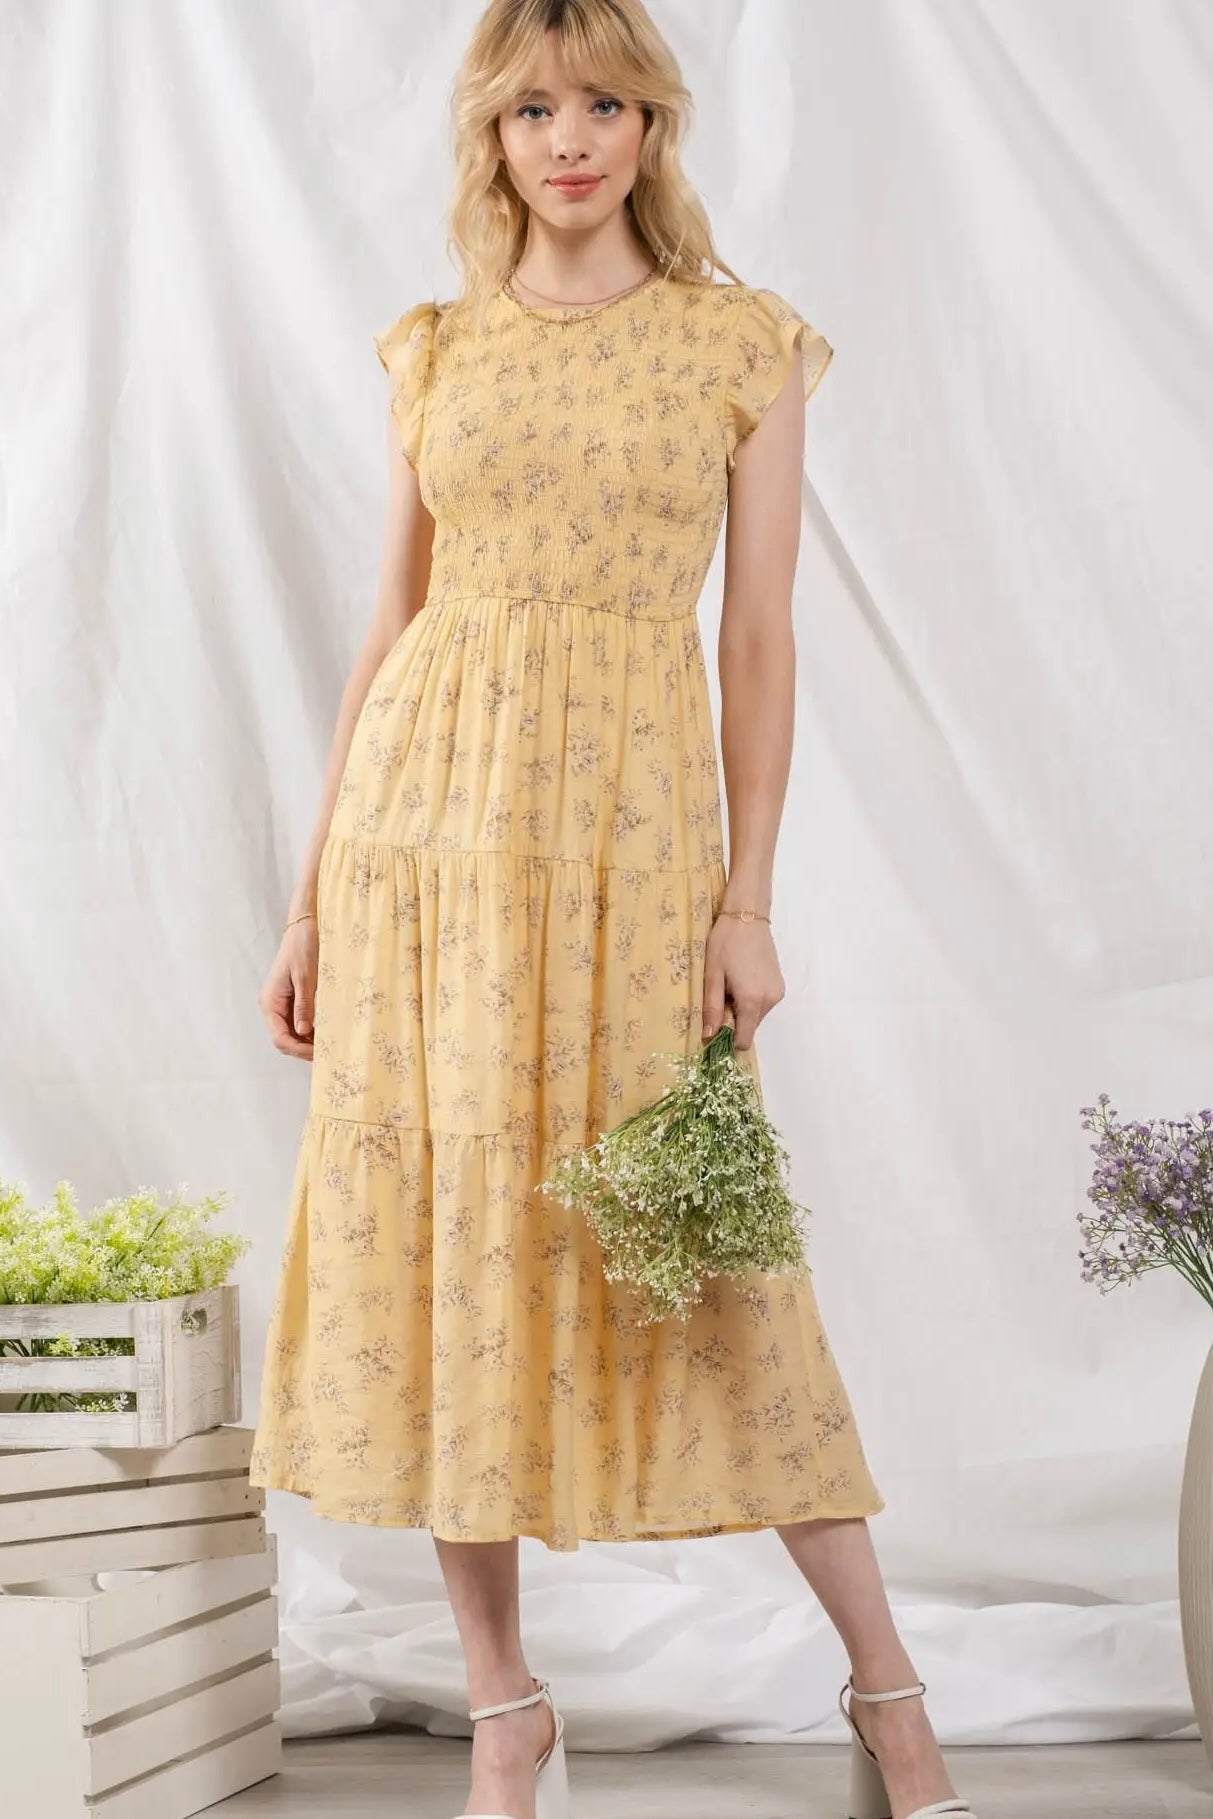 FLORAL DRESS - WILLOW